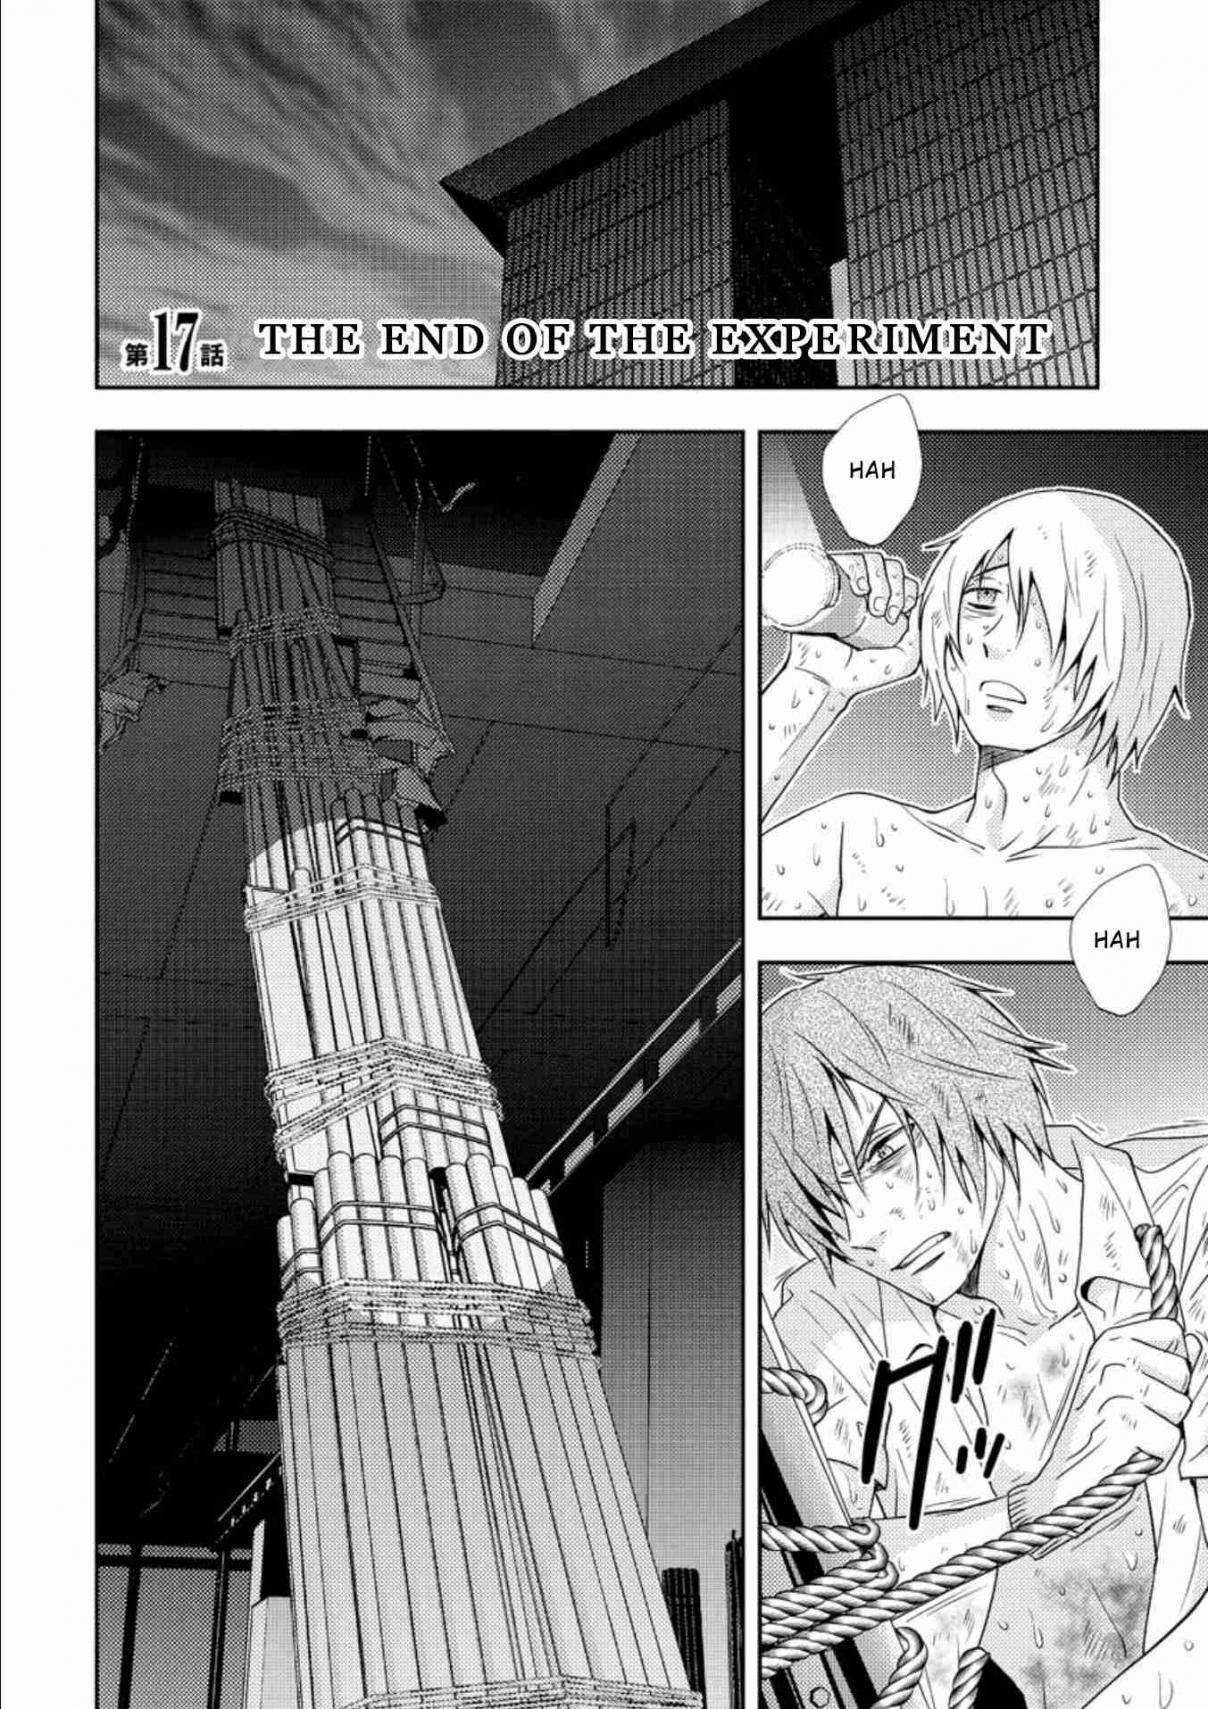 Mad Summer School Vol. 4 Ch. 17 The End of the Experiment